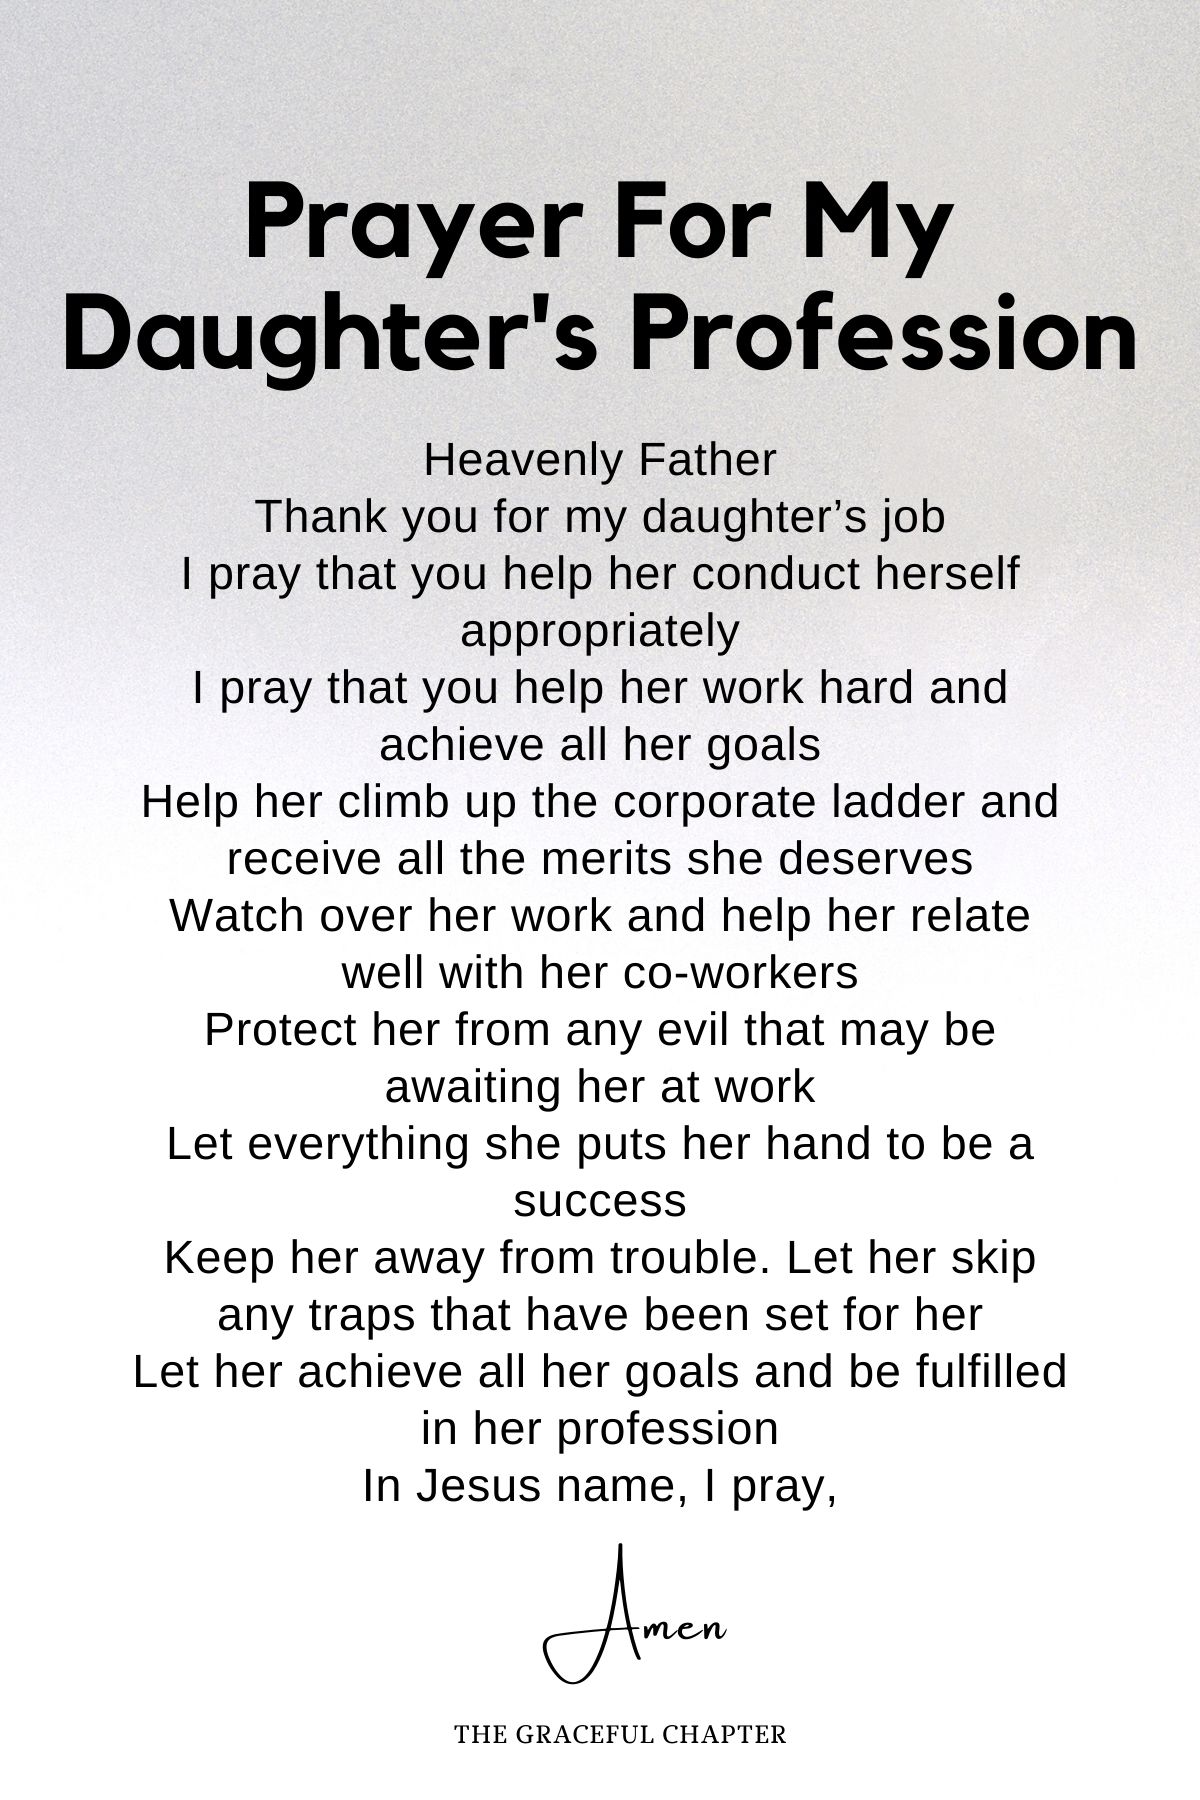 Prayer for my daughter's profession